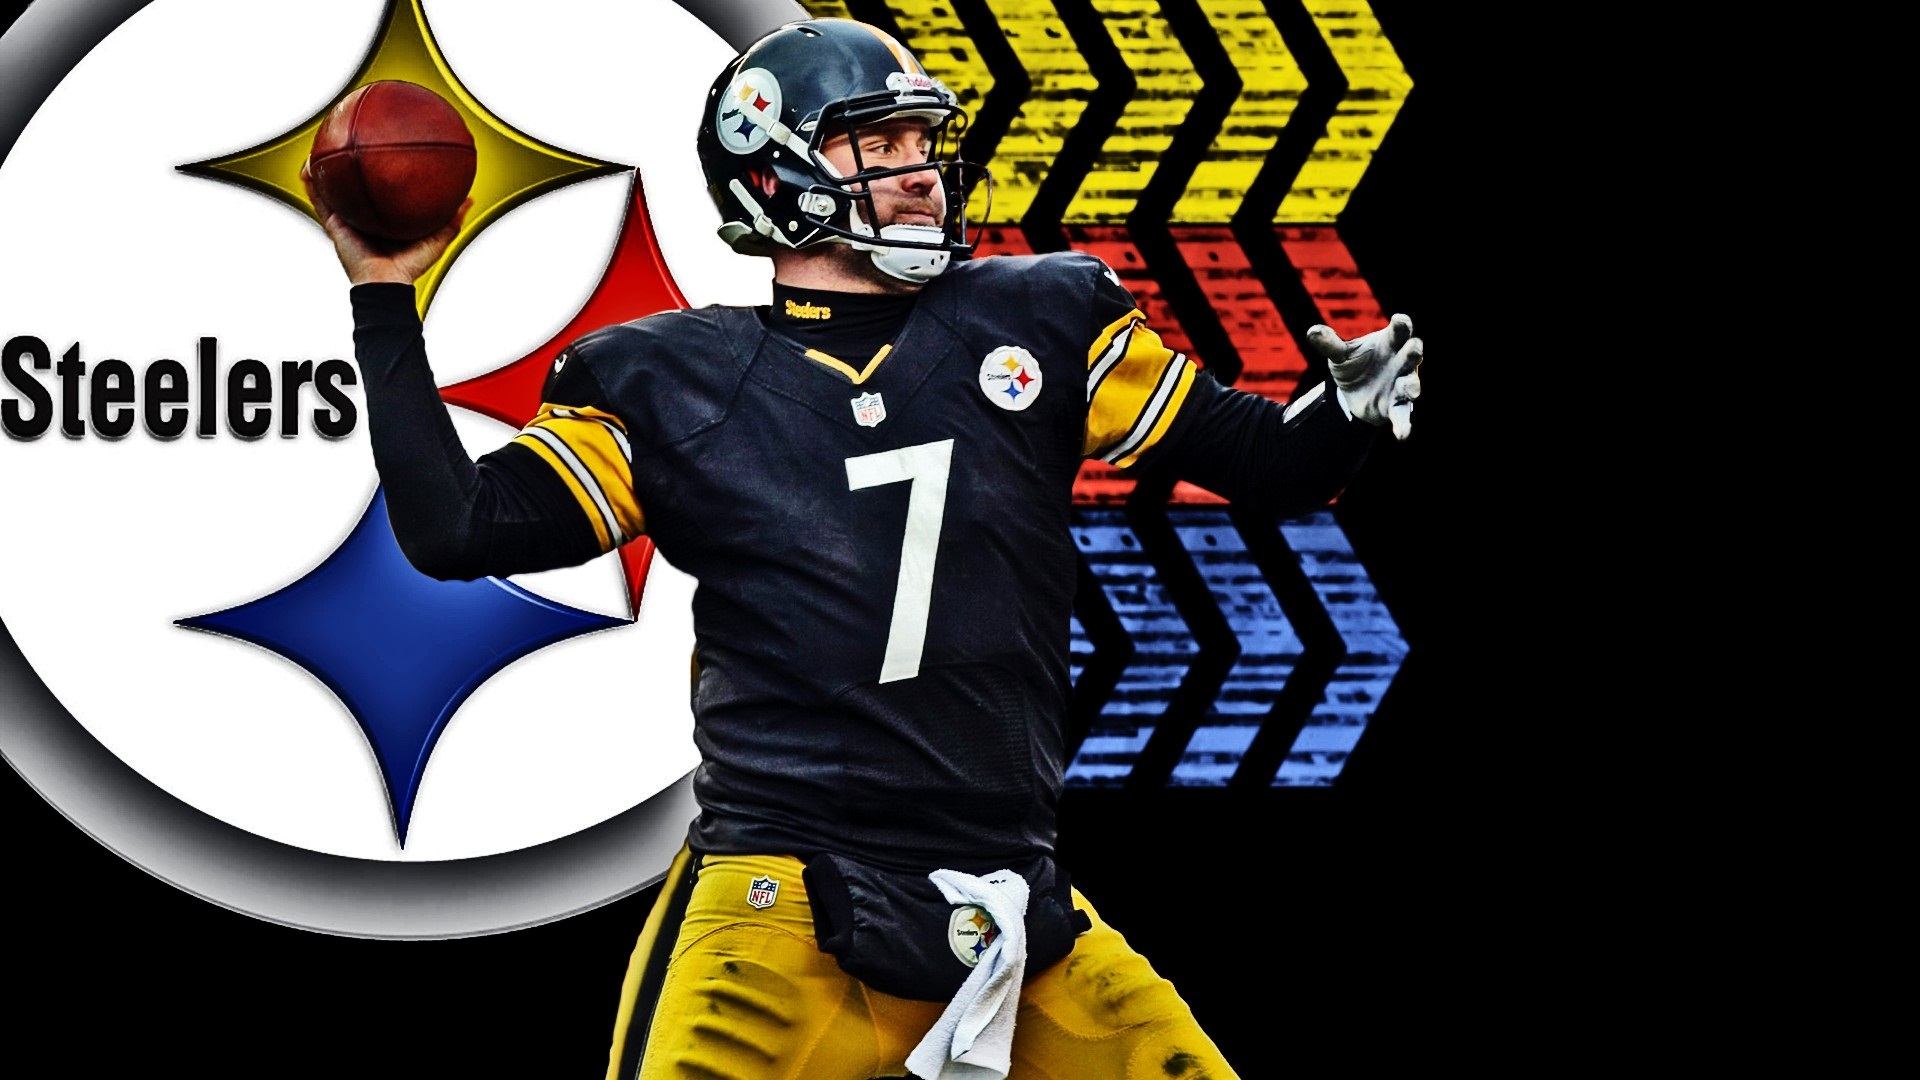 NFL Steelers Mac Backgrounds With Resolution 1920X1080 pixel. You can make this wallpaper for your Mac or Windows Desktop Background, iPhone, Android or Tablet and another Smartphone device for free